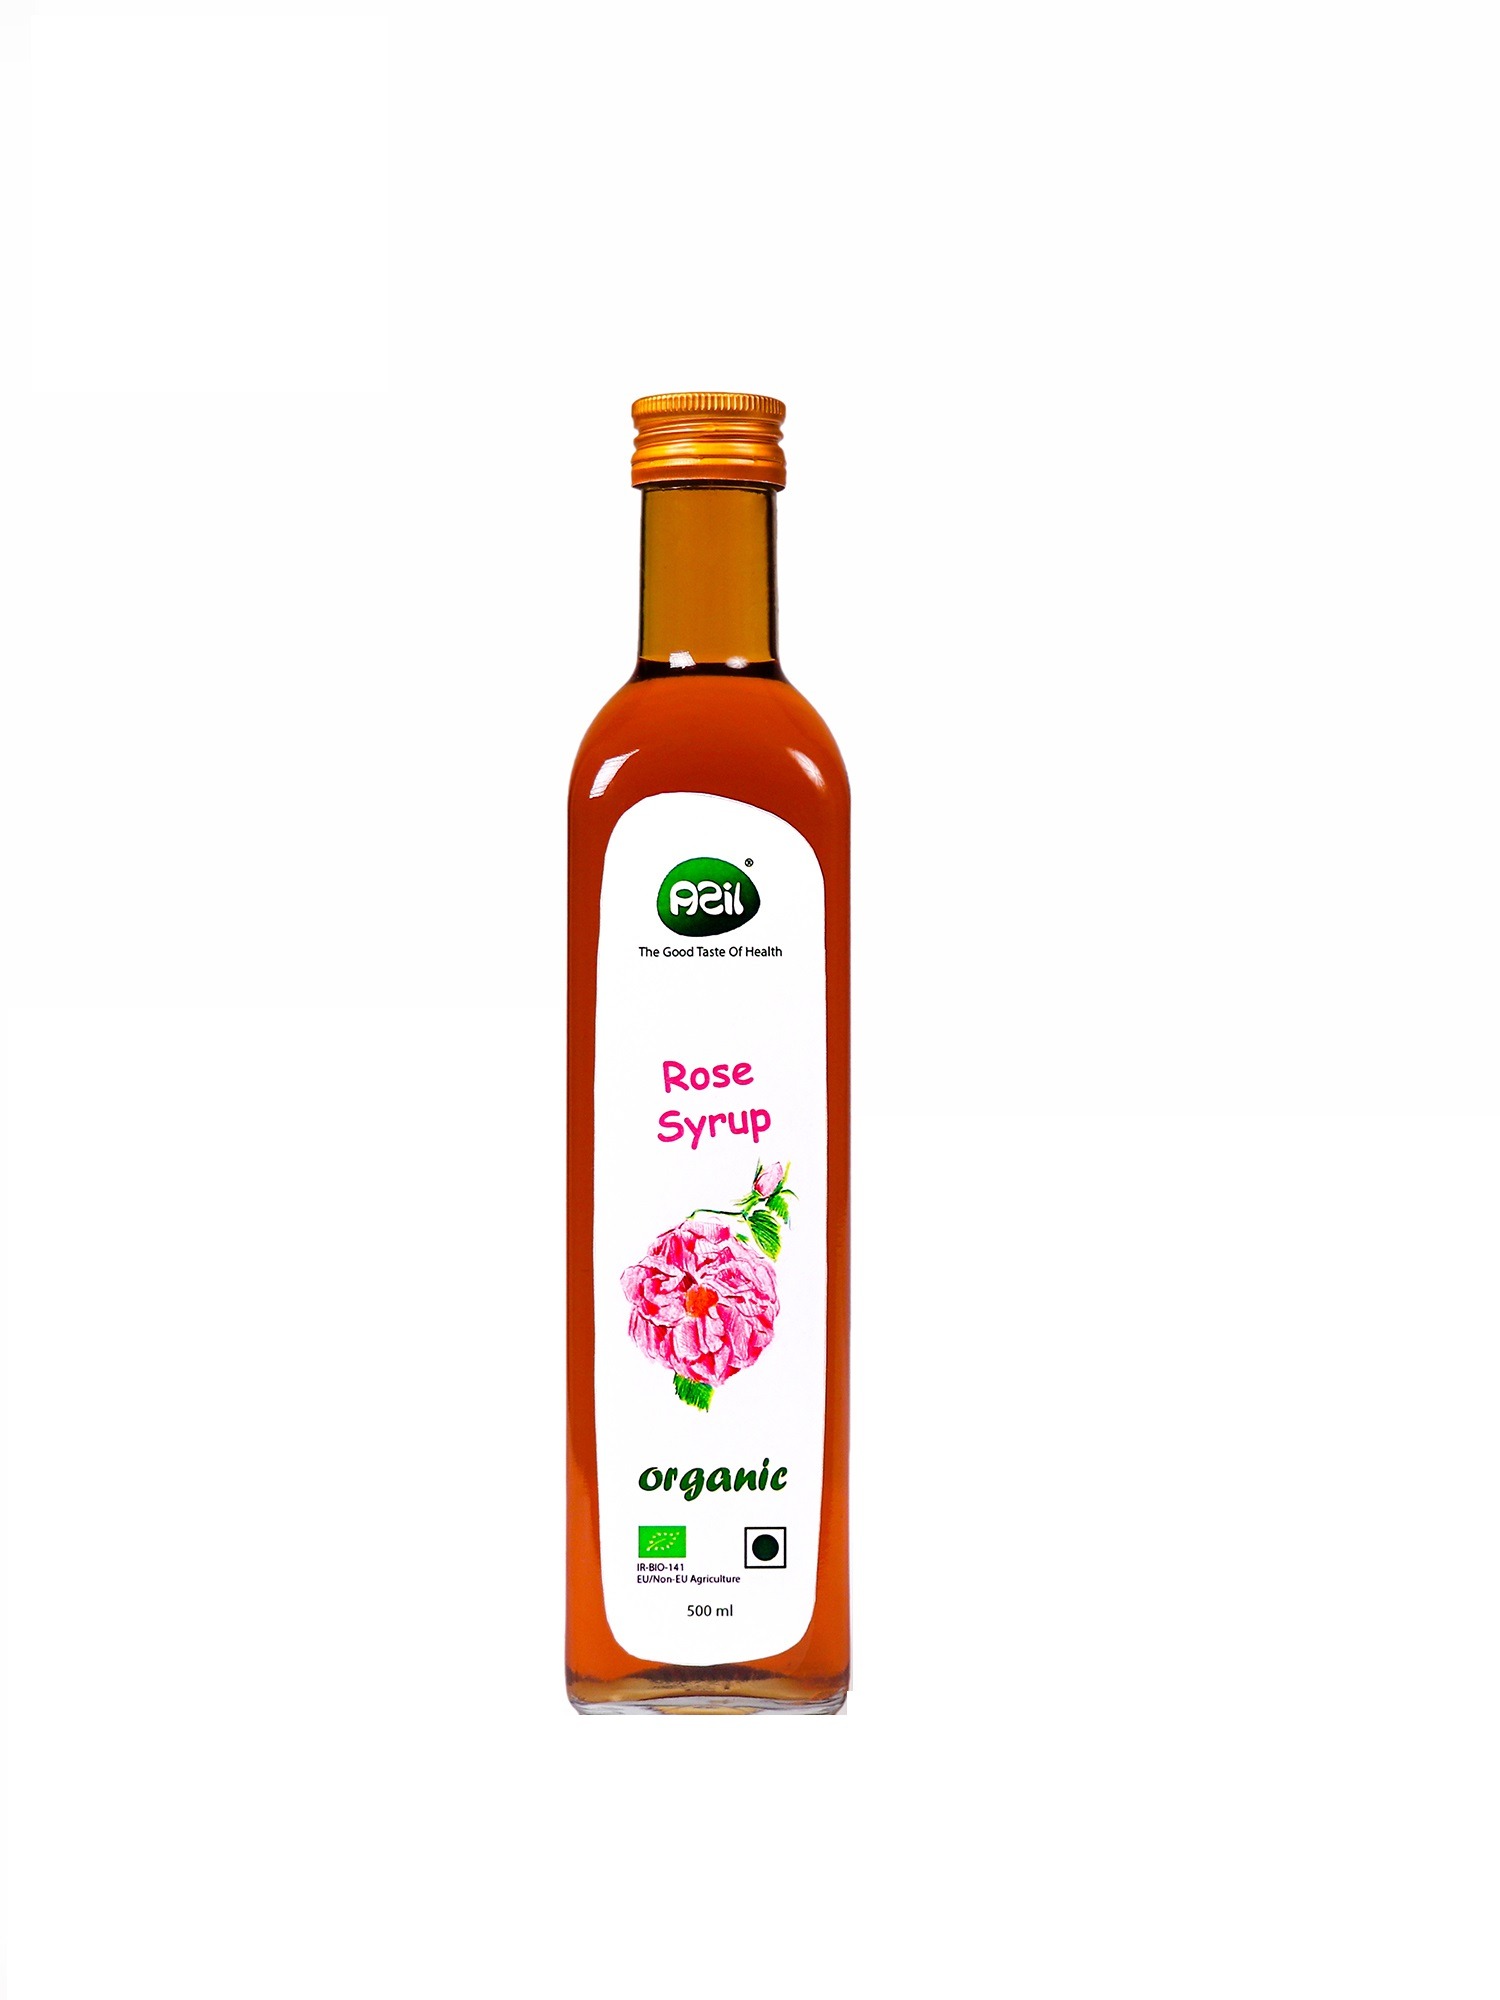 Rose syrup - Azil Organic Rosewater Syrup